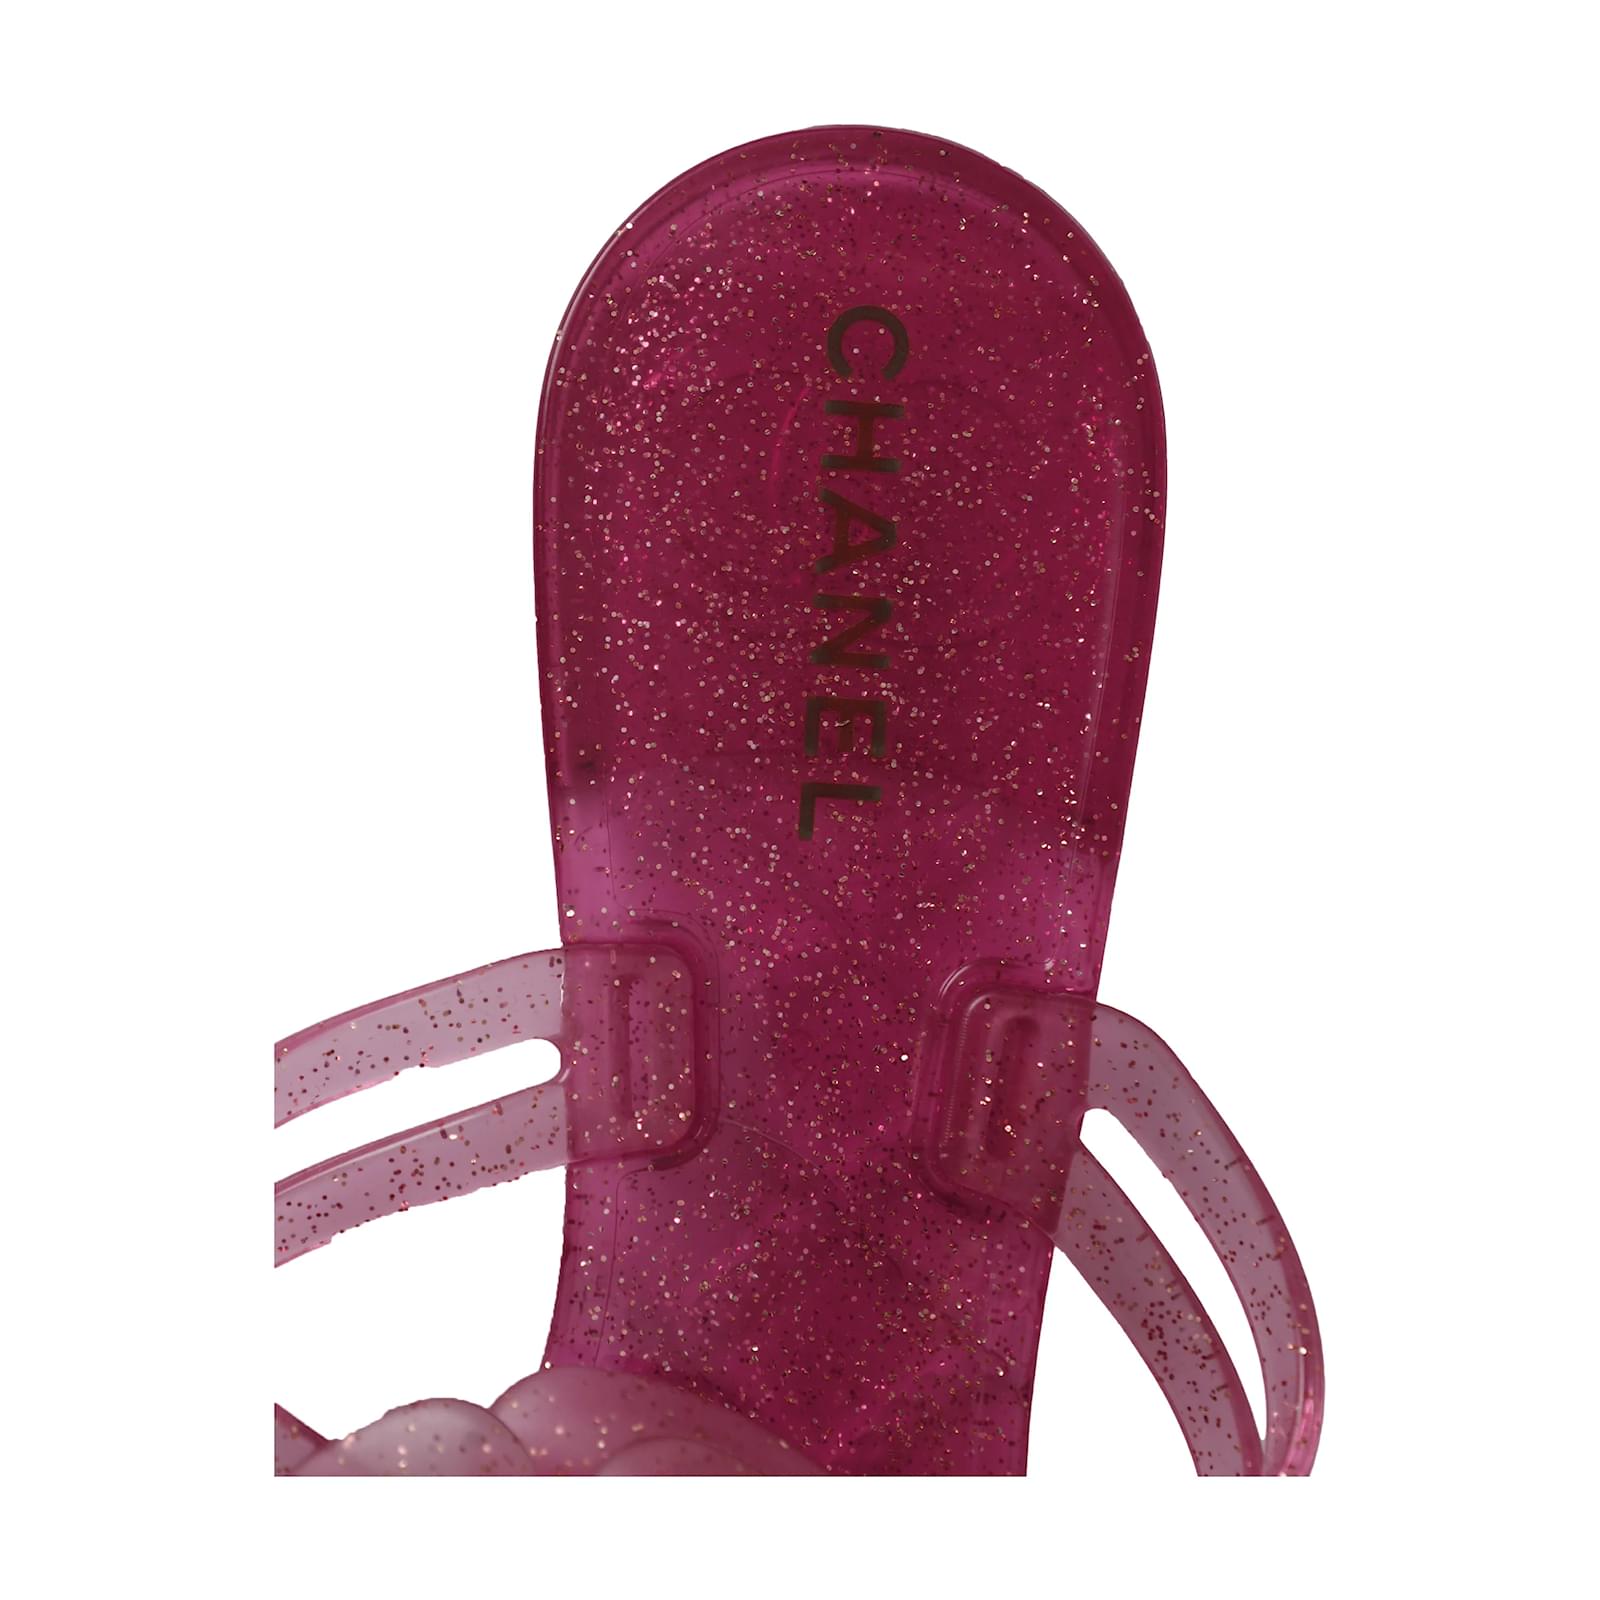 CHANEL, Shoes, Purple Sparkly Chanel Jelly Sandals